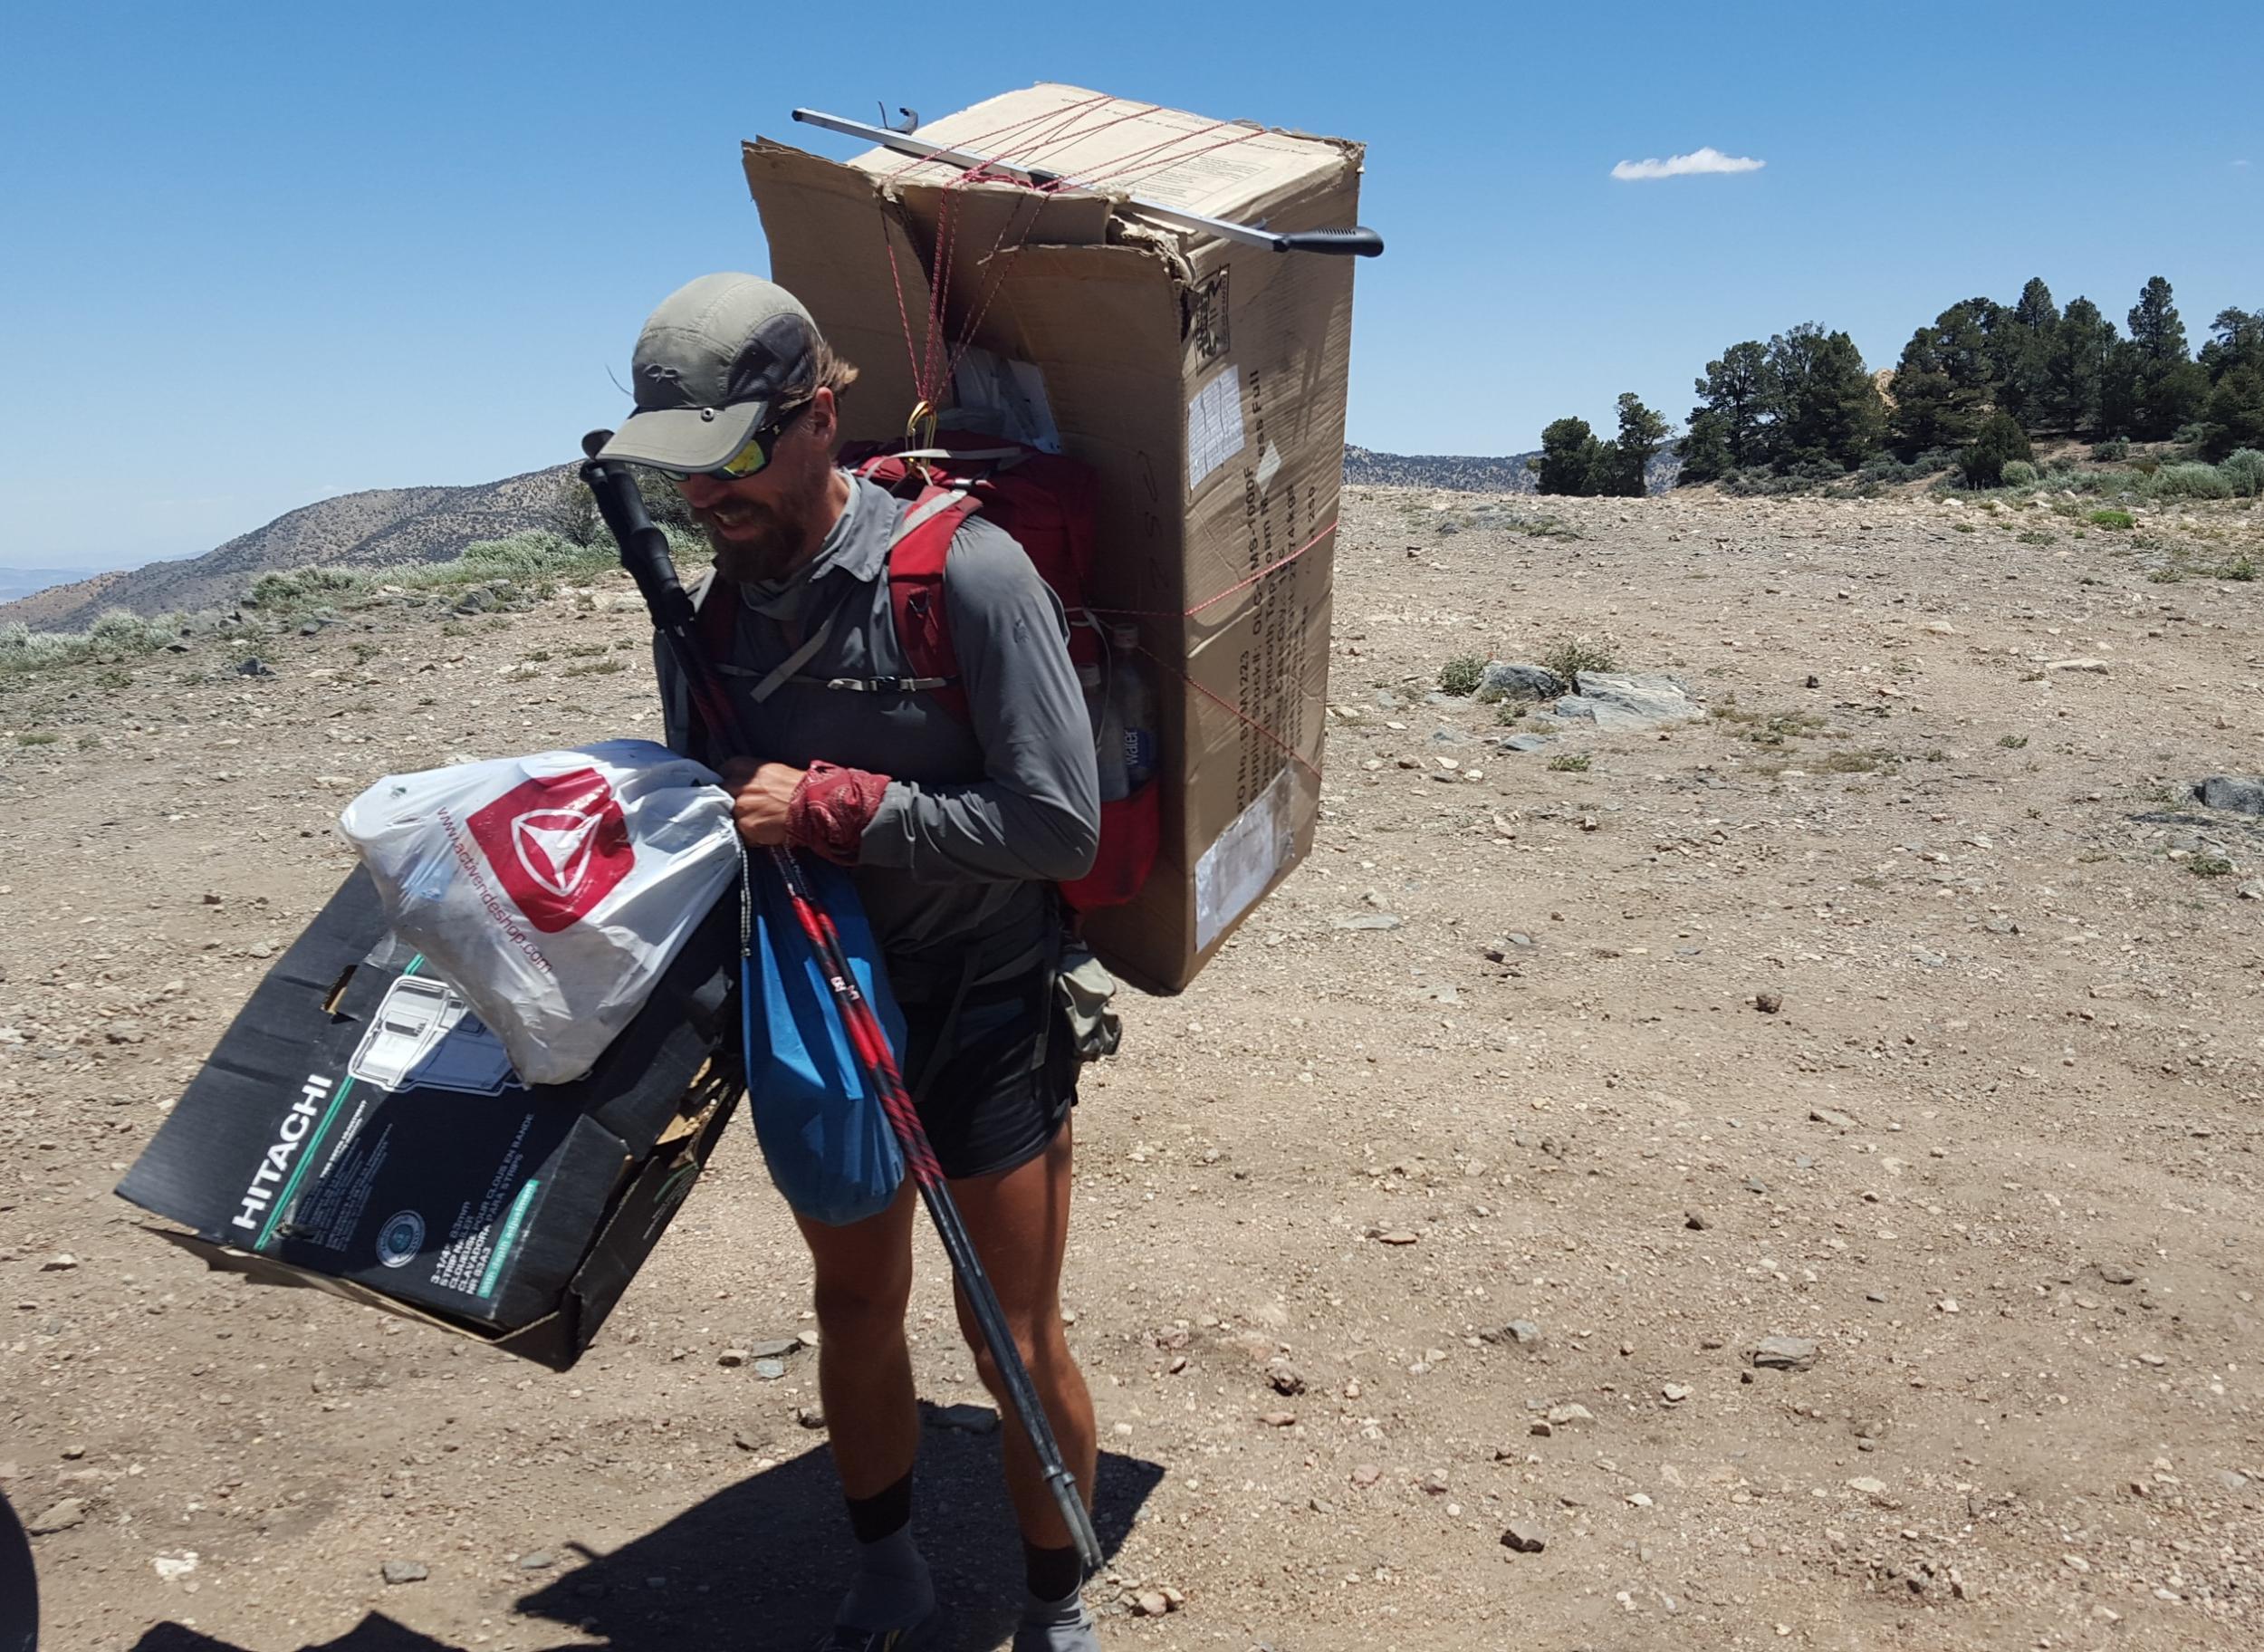 Seth Orme hikes with rubbish on his back until he can find a proper place to dispose of it